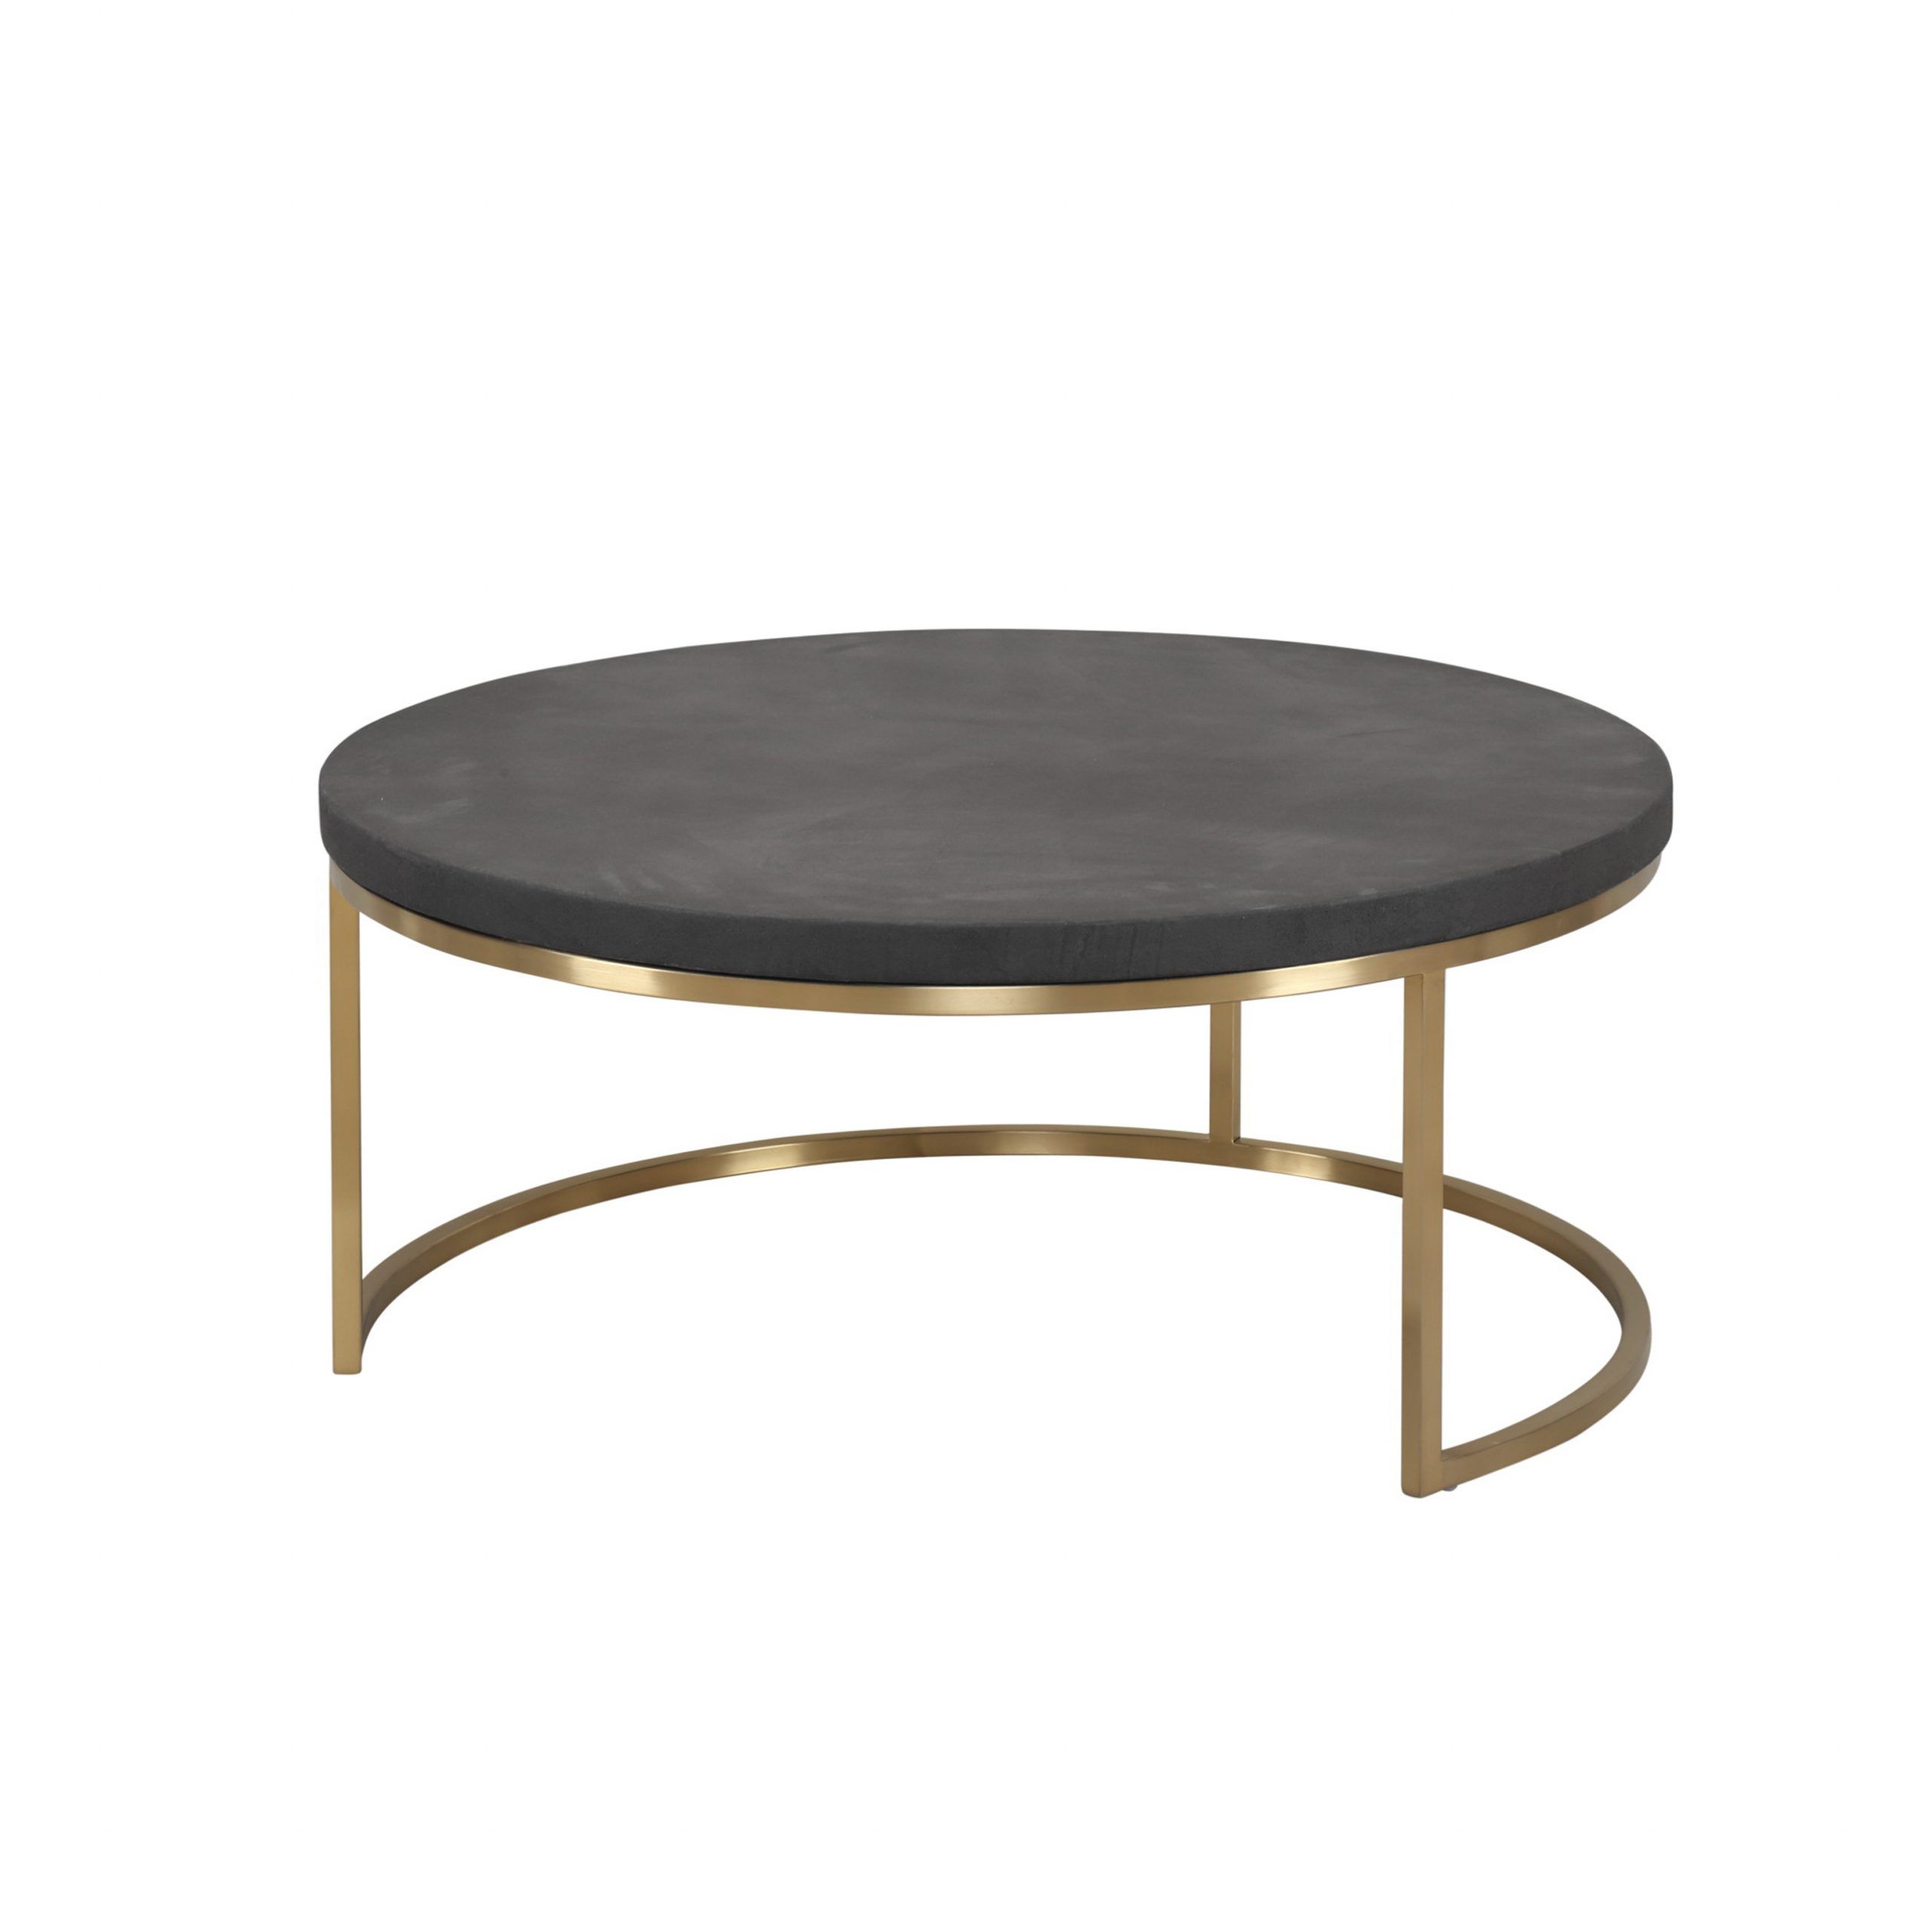 Deco 35" Round Coffee Table Black Concrete Laminate With For Popular Square Black And Brushed Gold Coffee Tables (View 9 of 20)